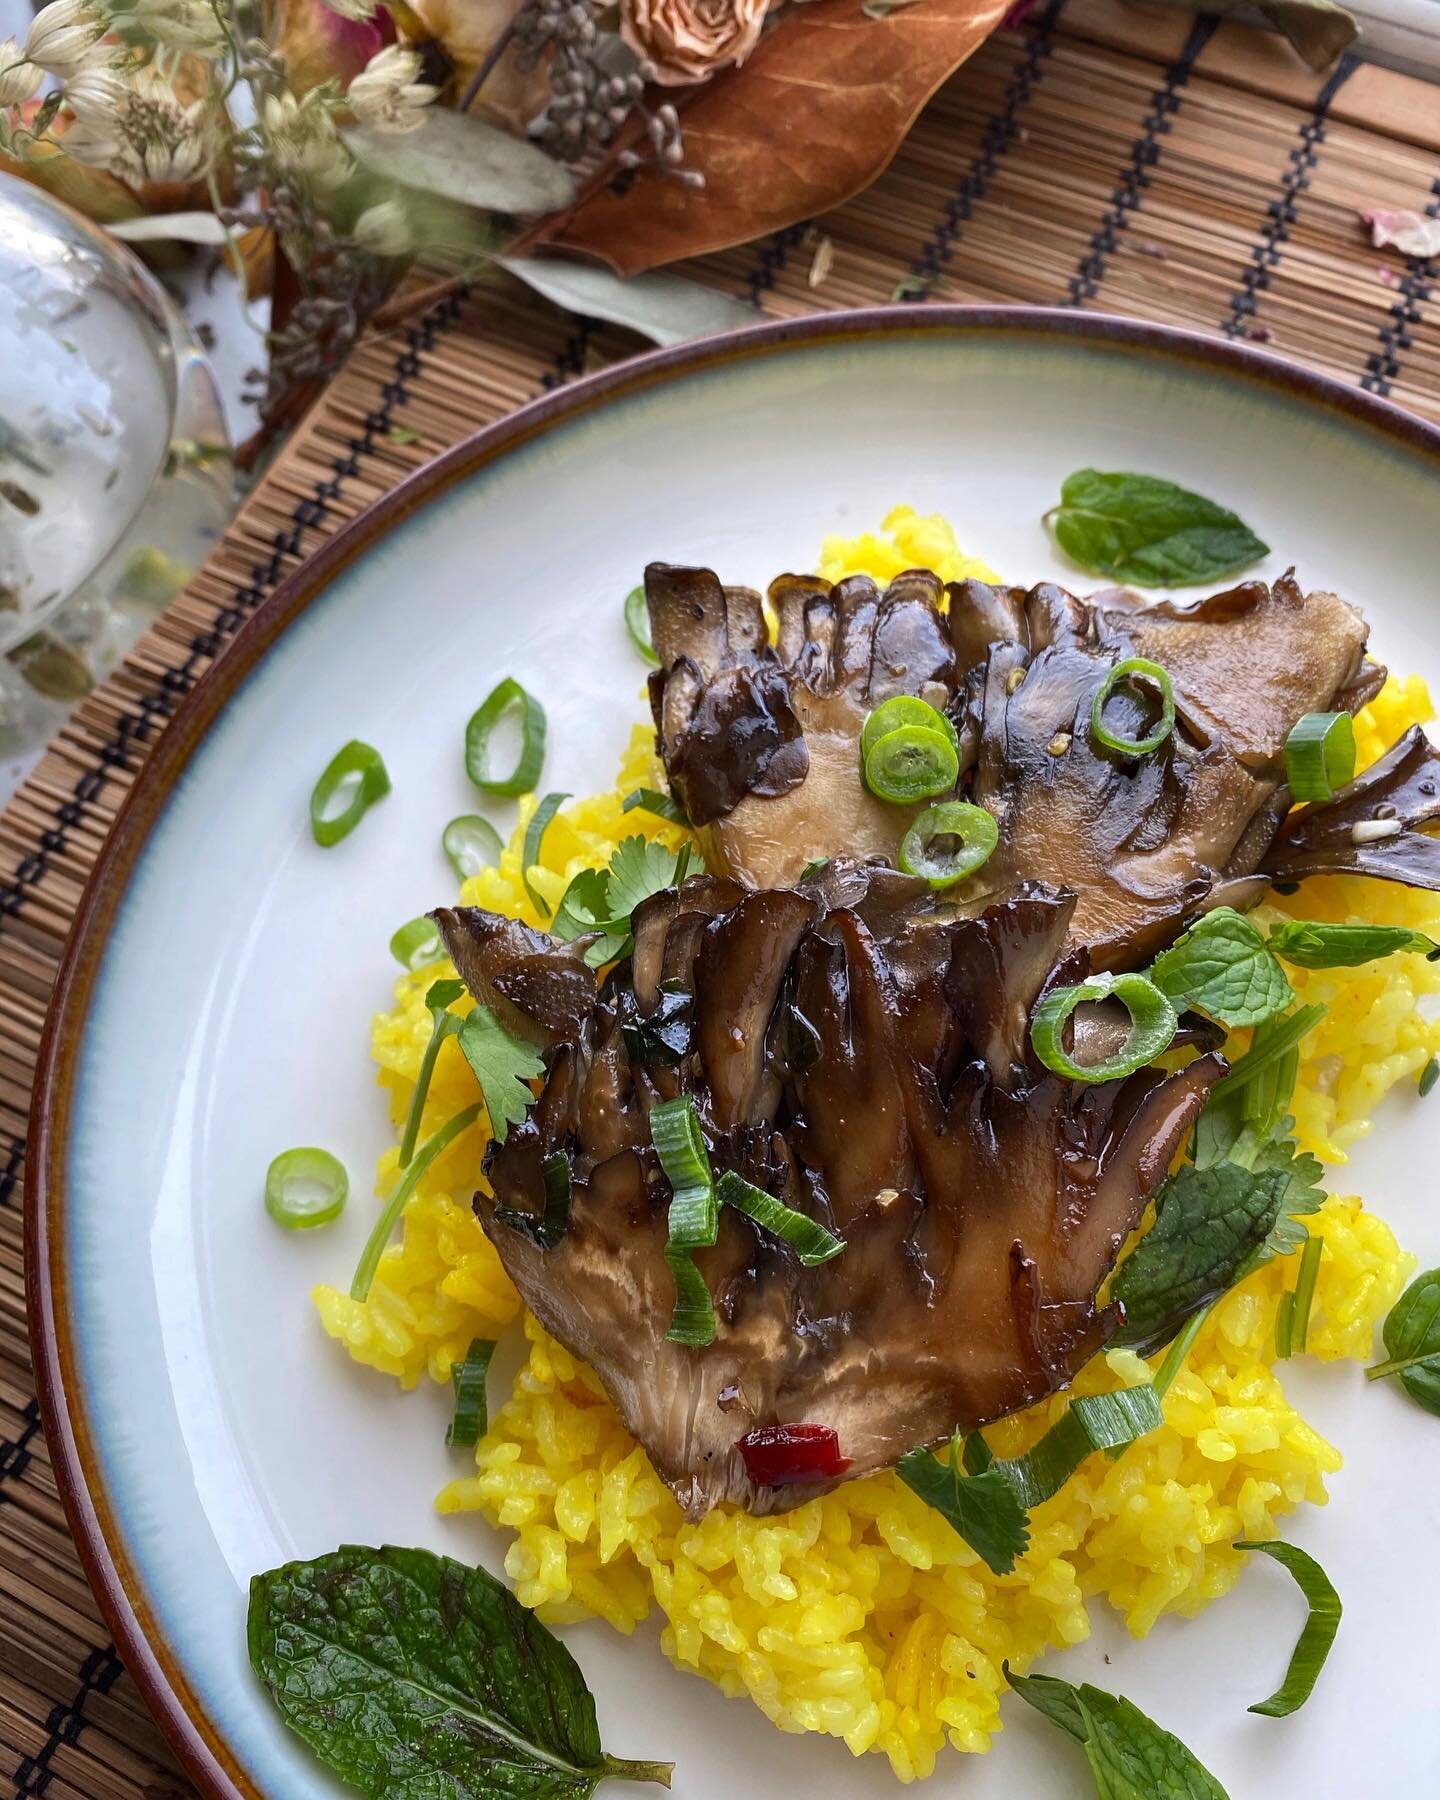 maitake + nước chấm🍄

Serving up these maitake steaks marinated in nước chấm and seared to perfection for #mushroommonday 😙Paired with a grain and loads of herbs, this dish has my tastebuds DANCING💃🏻

#wailifestyle #findyourwai #hungyungy